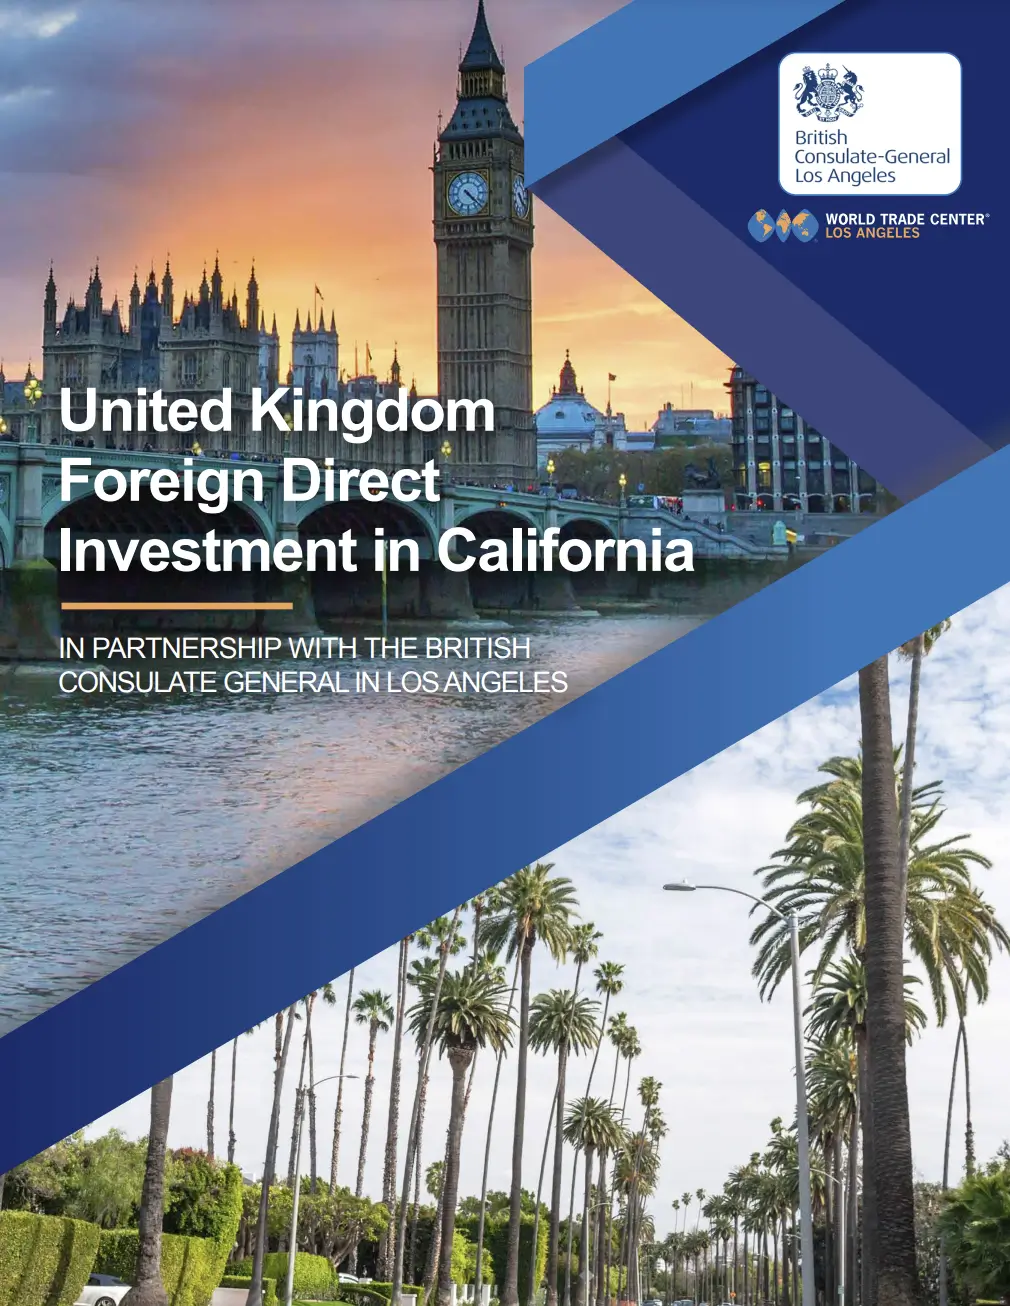 United Kingdom Foreign Direct Investment in California